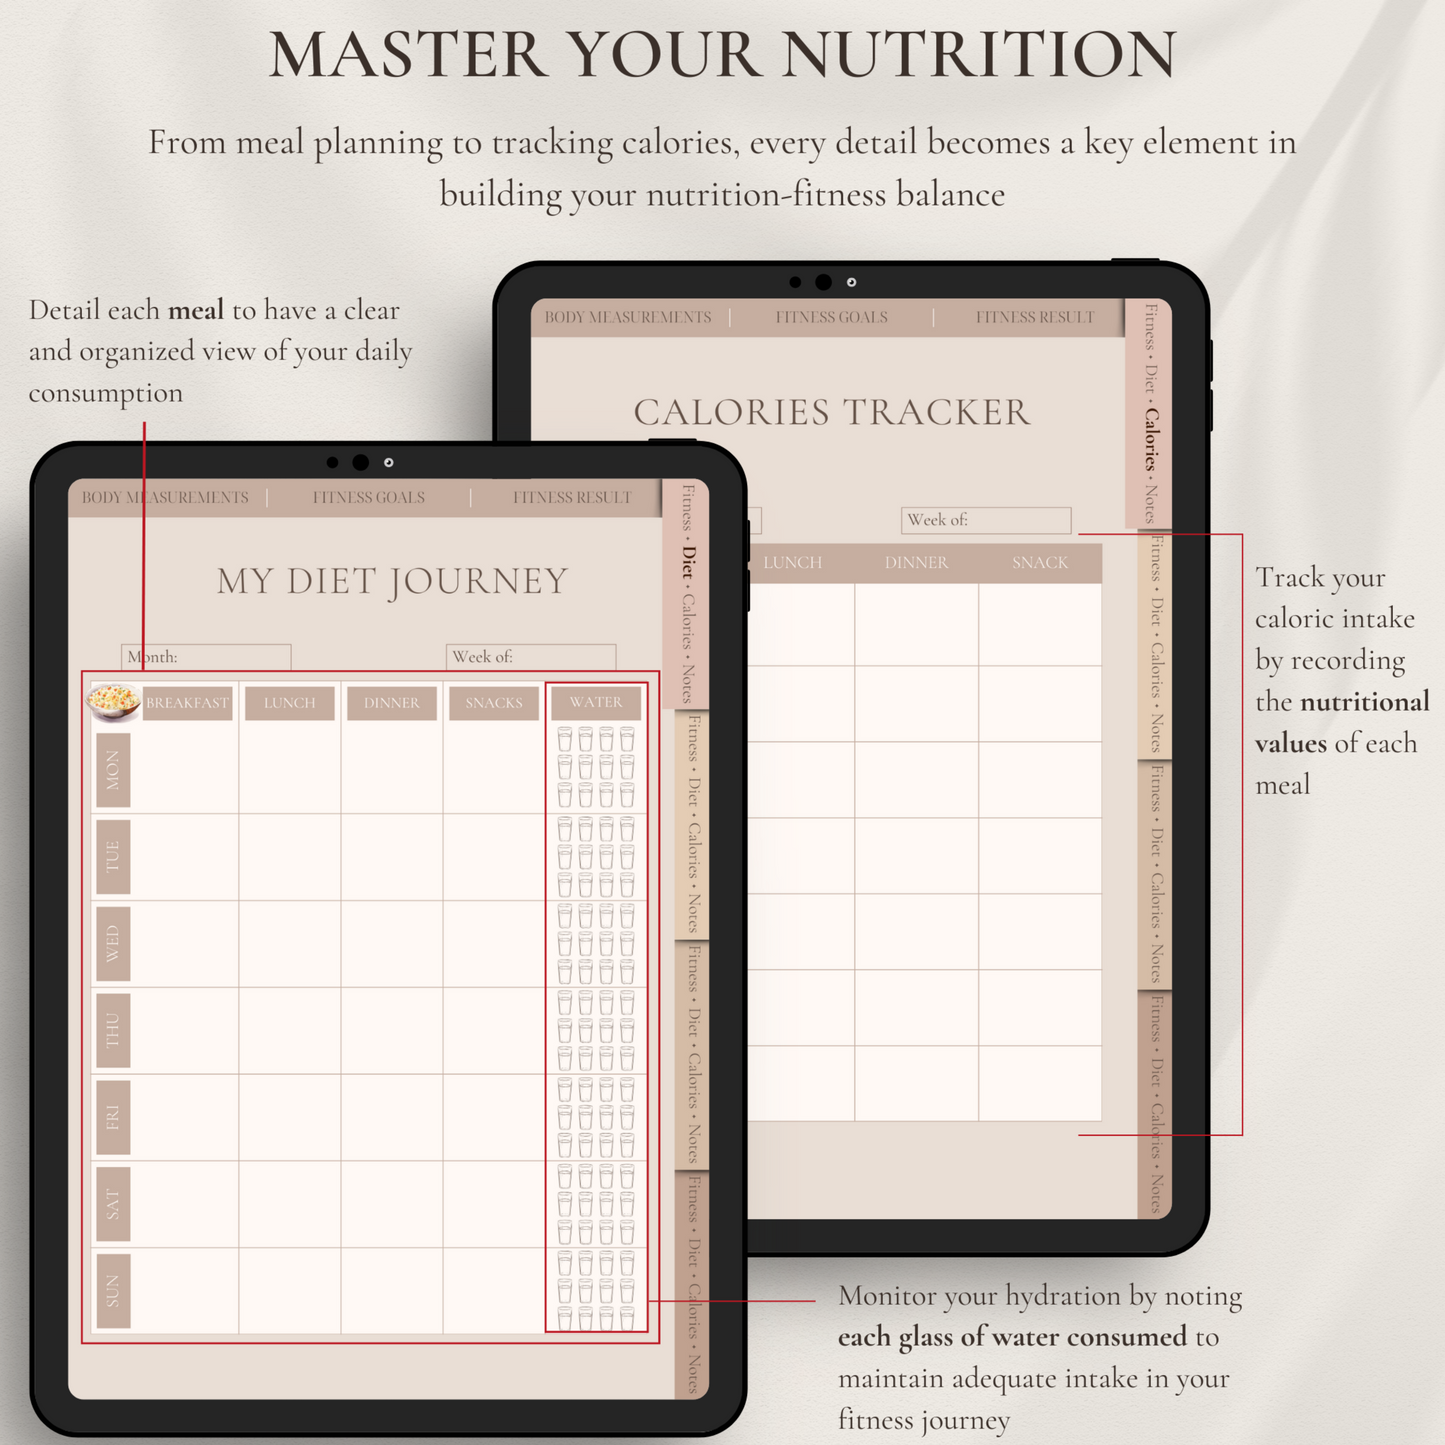 From meal planning to tracking calories, every detail becomes a key element in building your nutrition-fitness balance